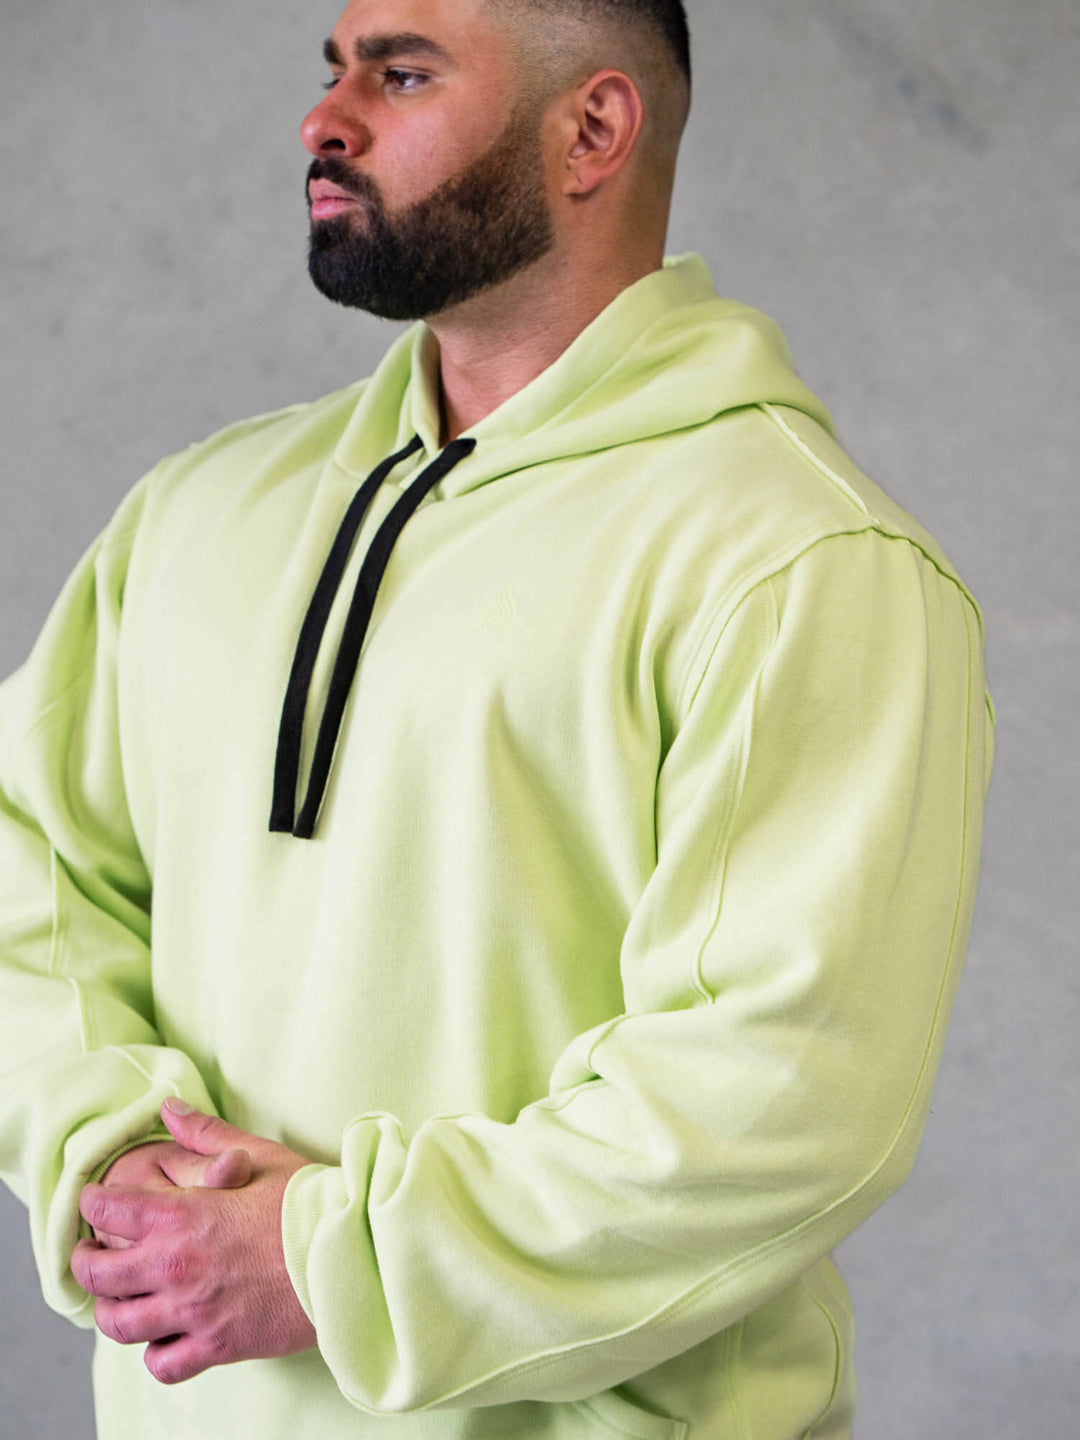 Force Pullover Hoodie - Lime Clothing Ryderwear 